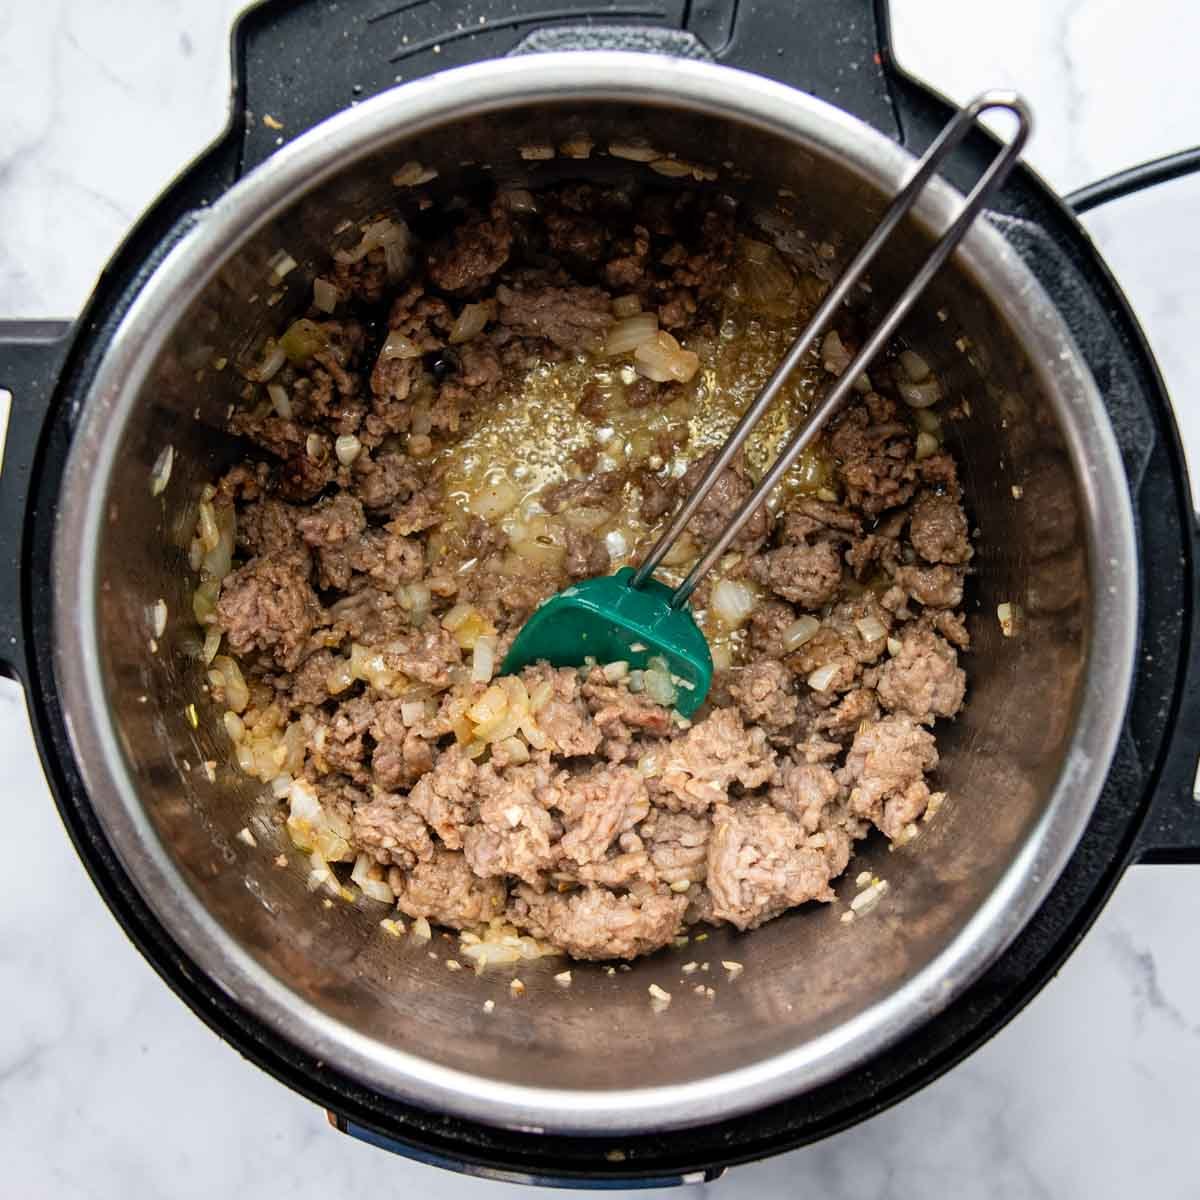 sausage, onions, and garlic cooking in the pressure cooker.